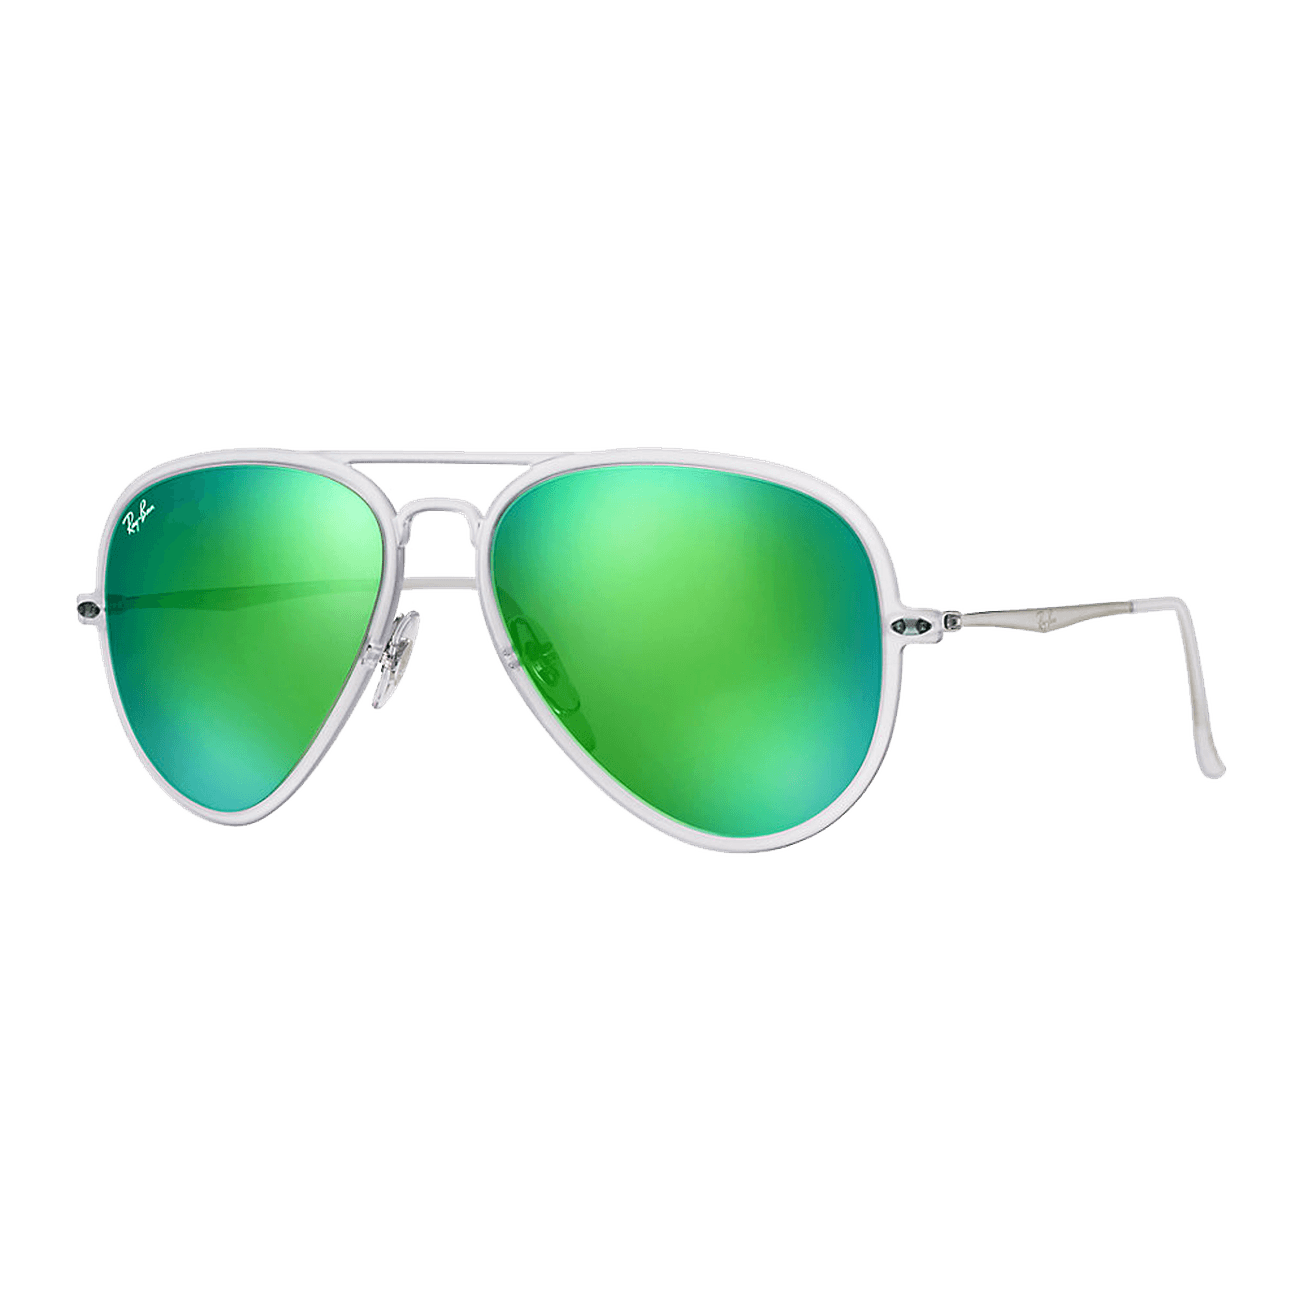 Download Ray Ban Aviator Light Ray Ii Transparent Mat Vert Miroite Microsoft Powerpoint Png Image With No Background Pngkey Com